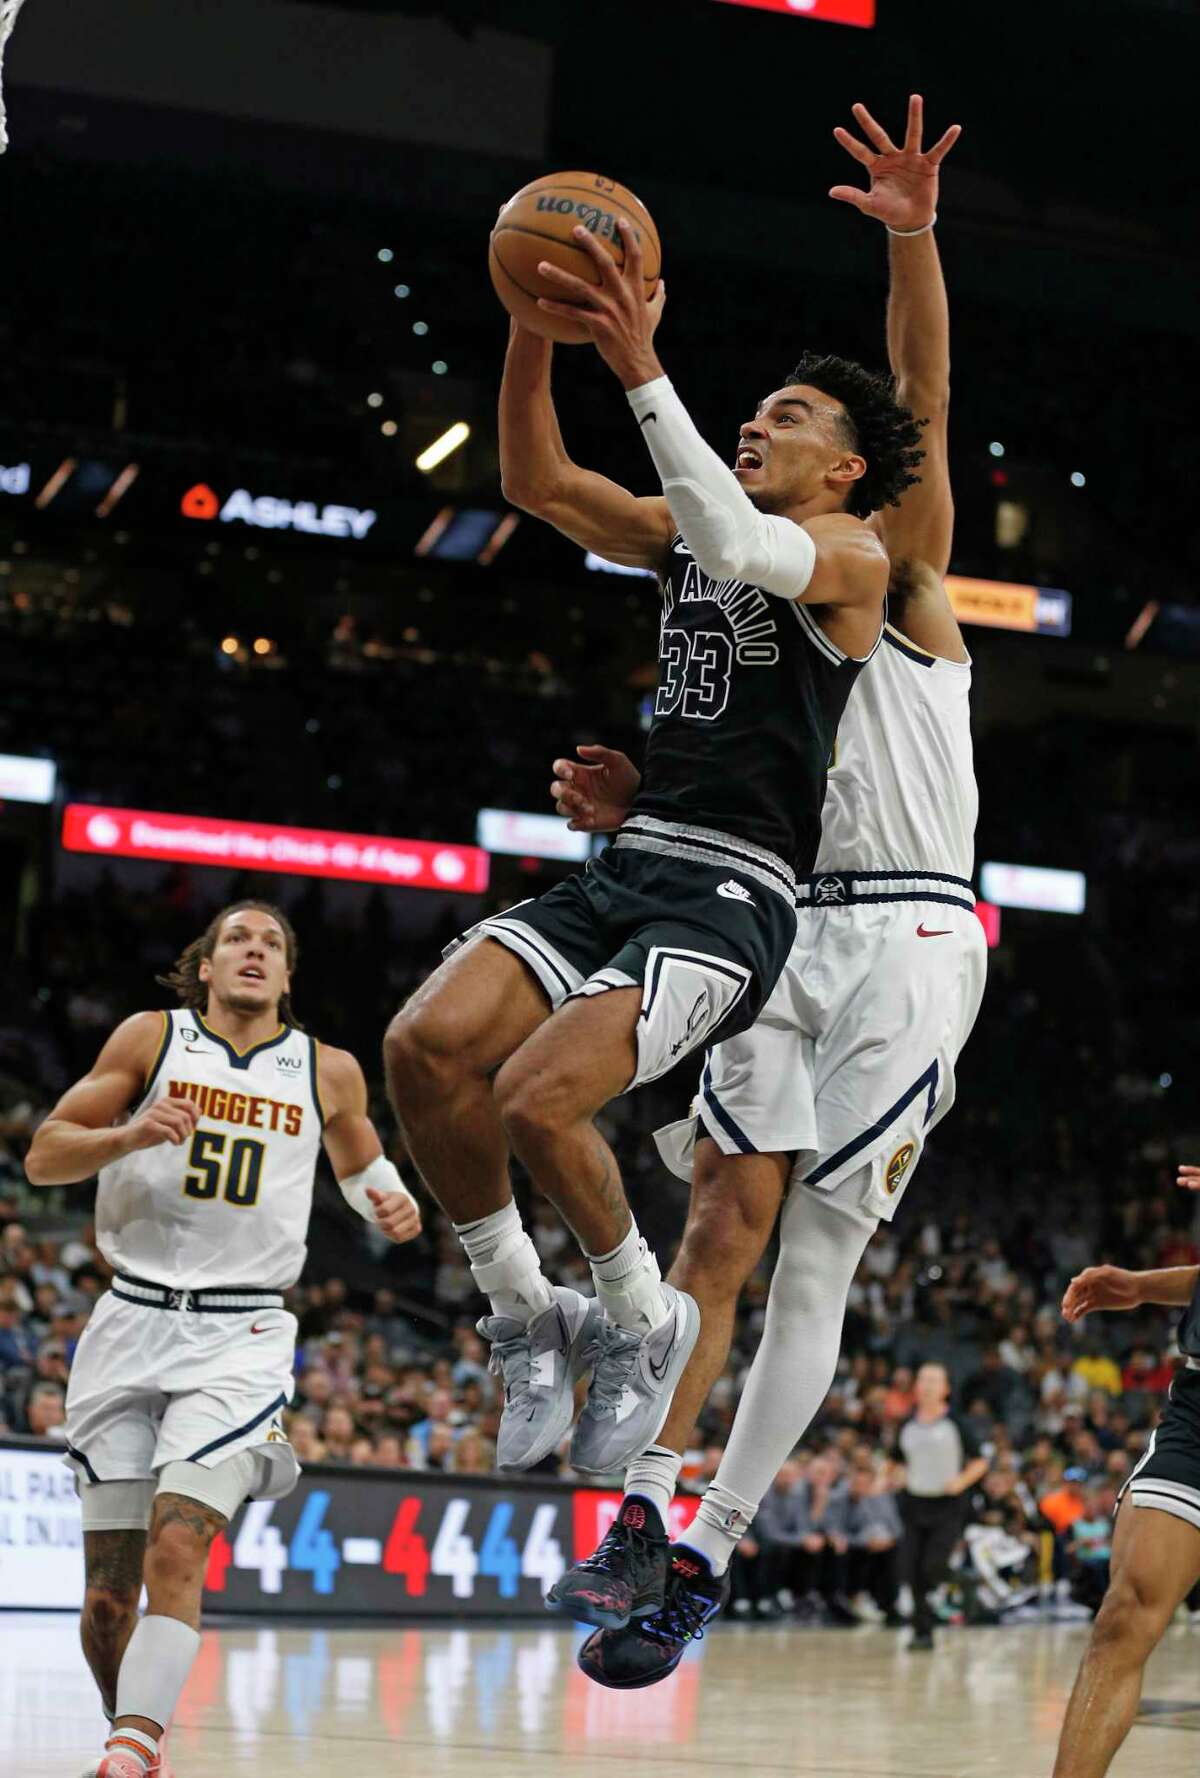 San Antonio Spurs Tre Jones #33 (33) drives for two against the Denver Nuggets in the first half on Monday, Nov. 7, 2022 at AT&T Center